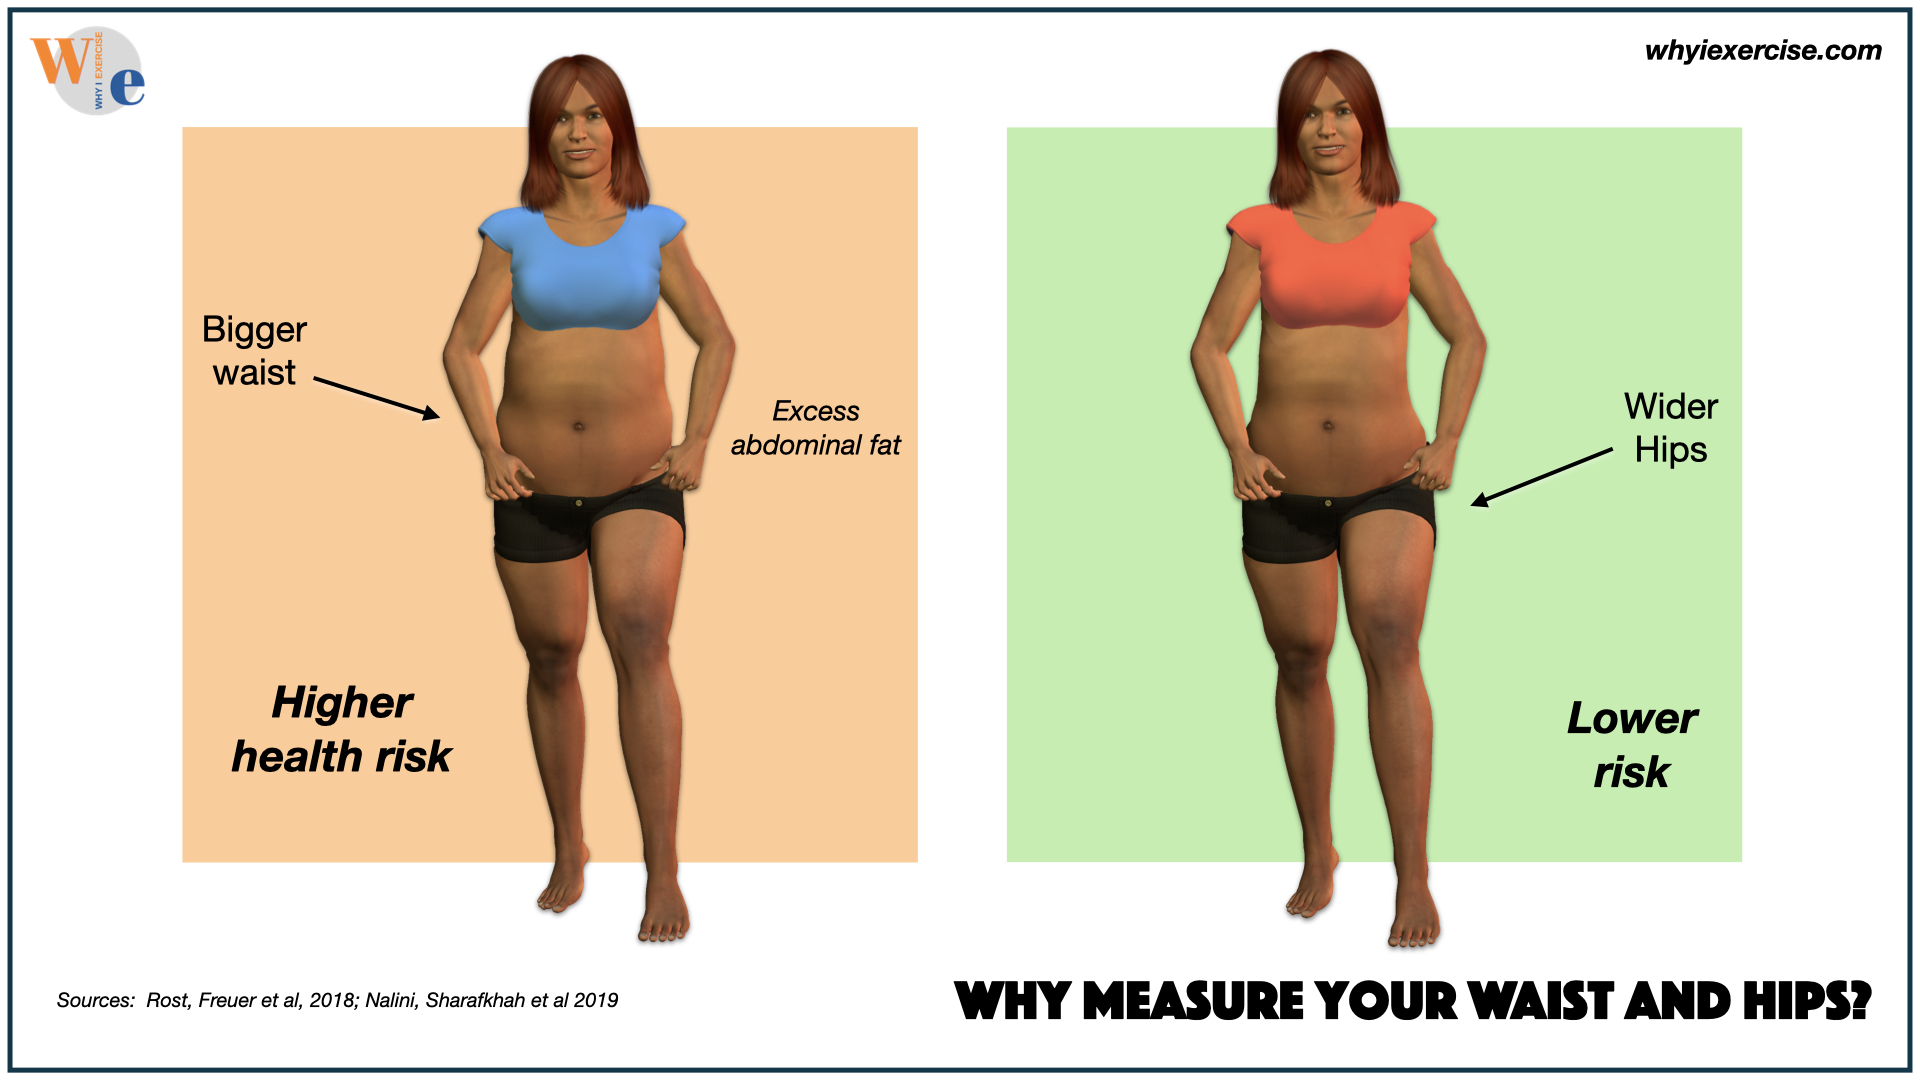 https://www.whyiexercise.com/images/why-measure-your-waist-and-hips.jpg